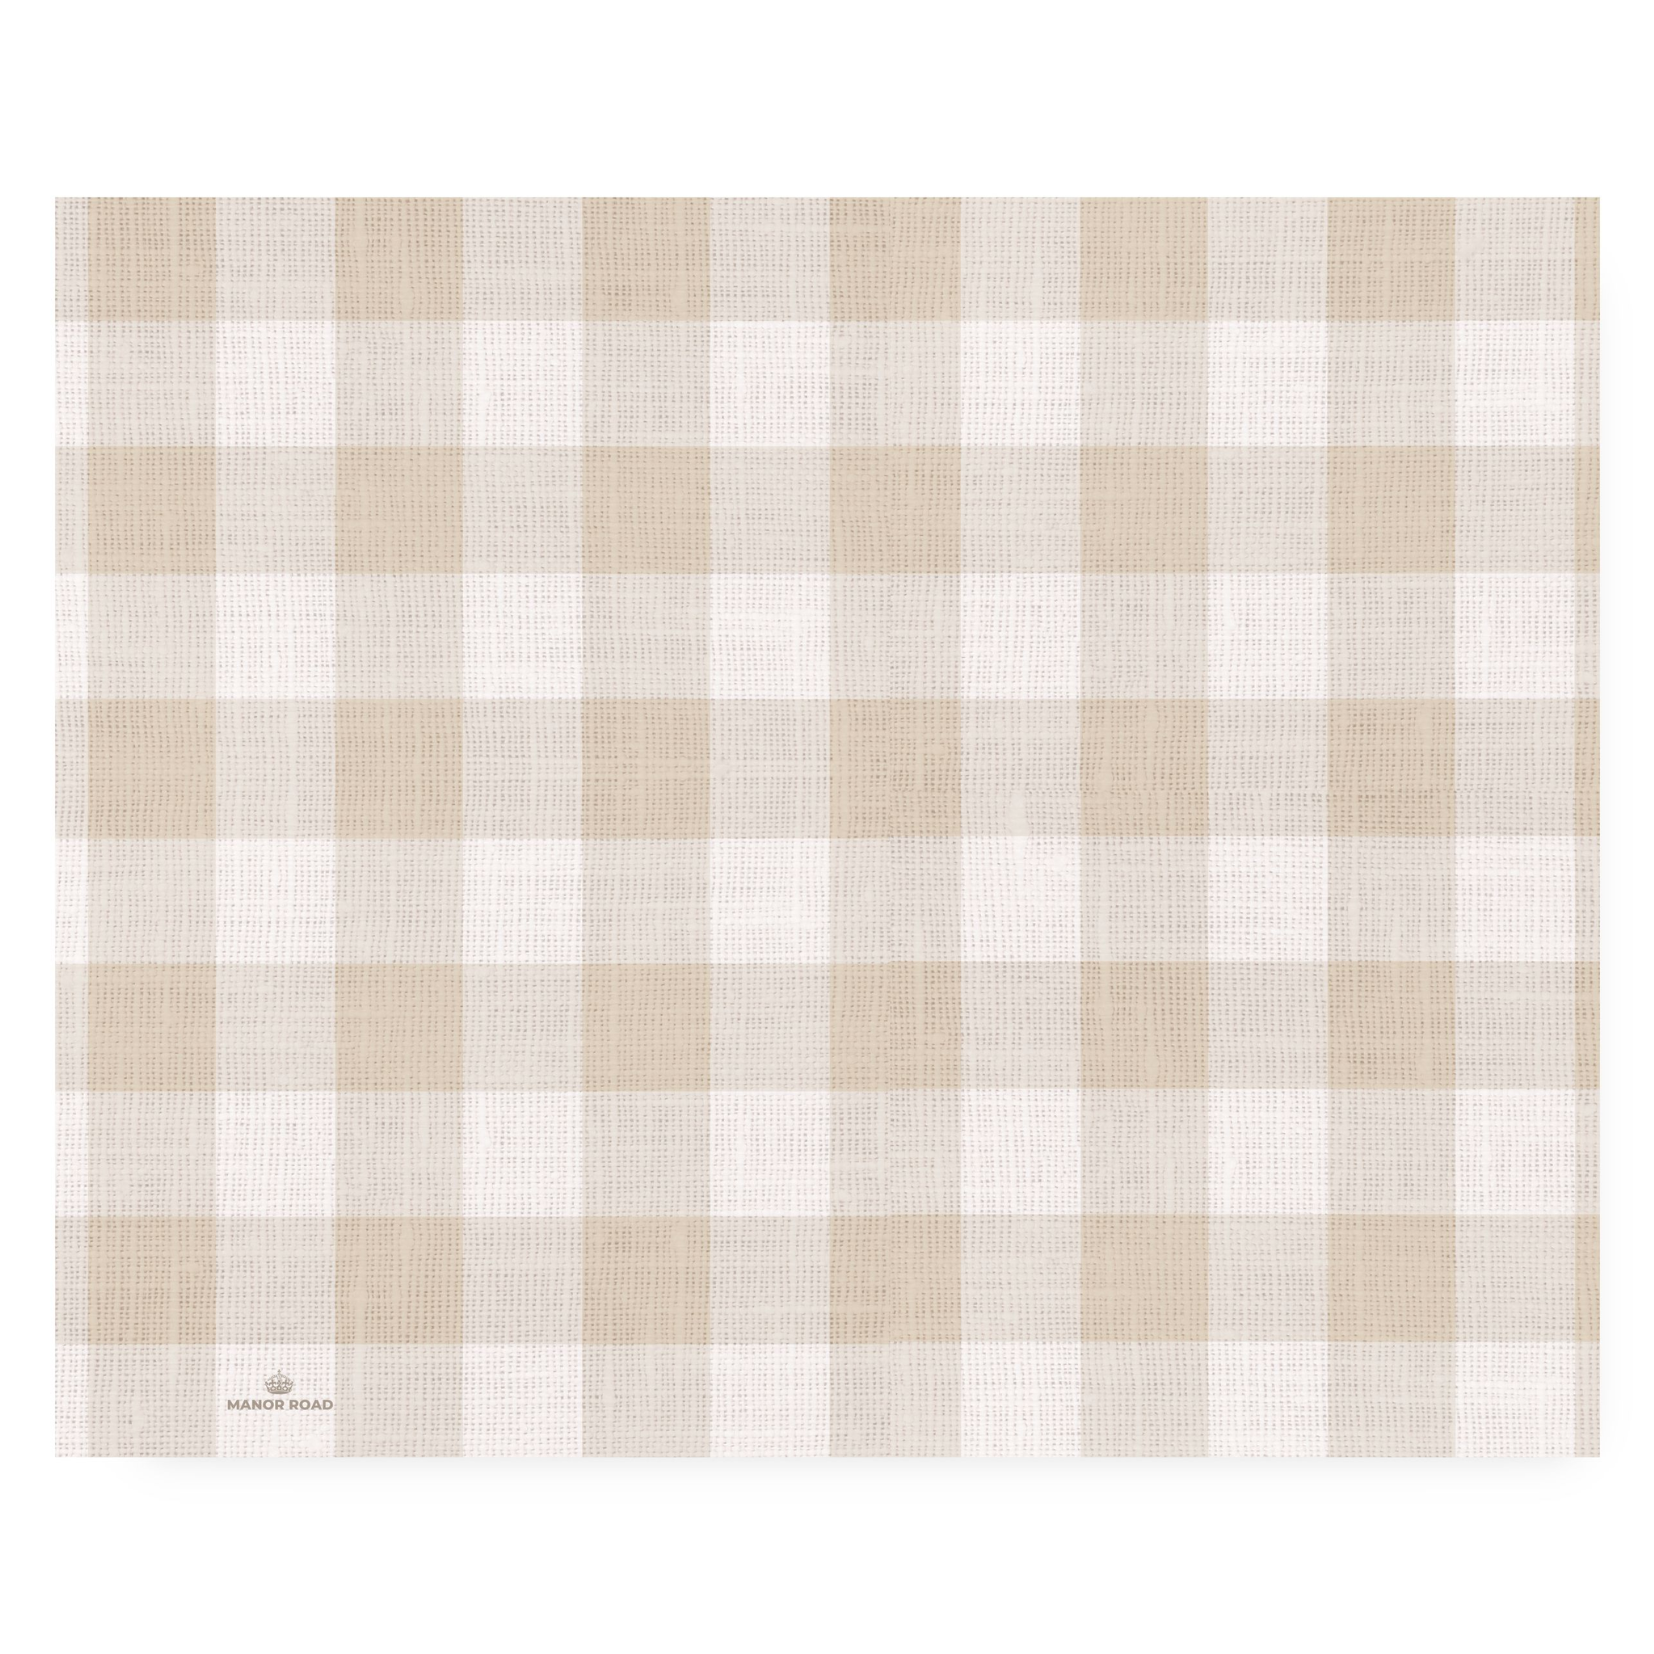 Manor Road Gingham Paper Placemats 30ct